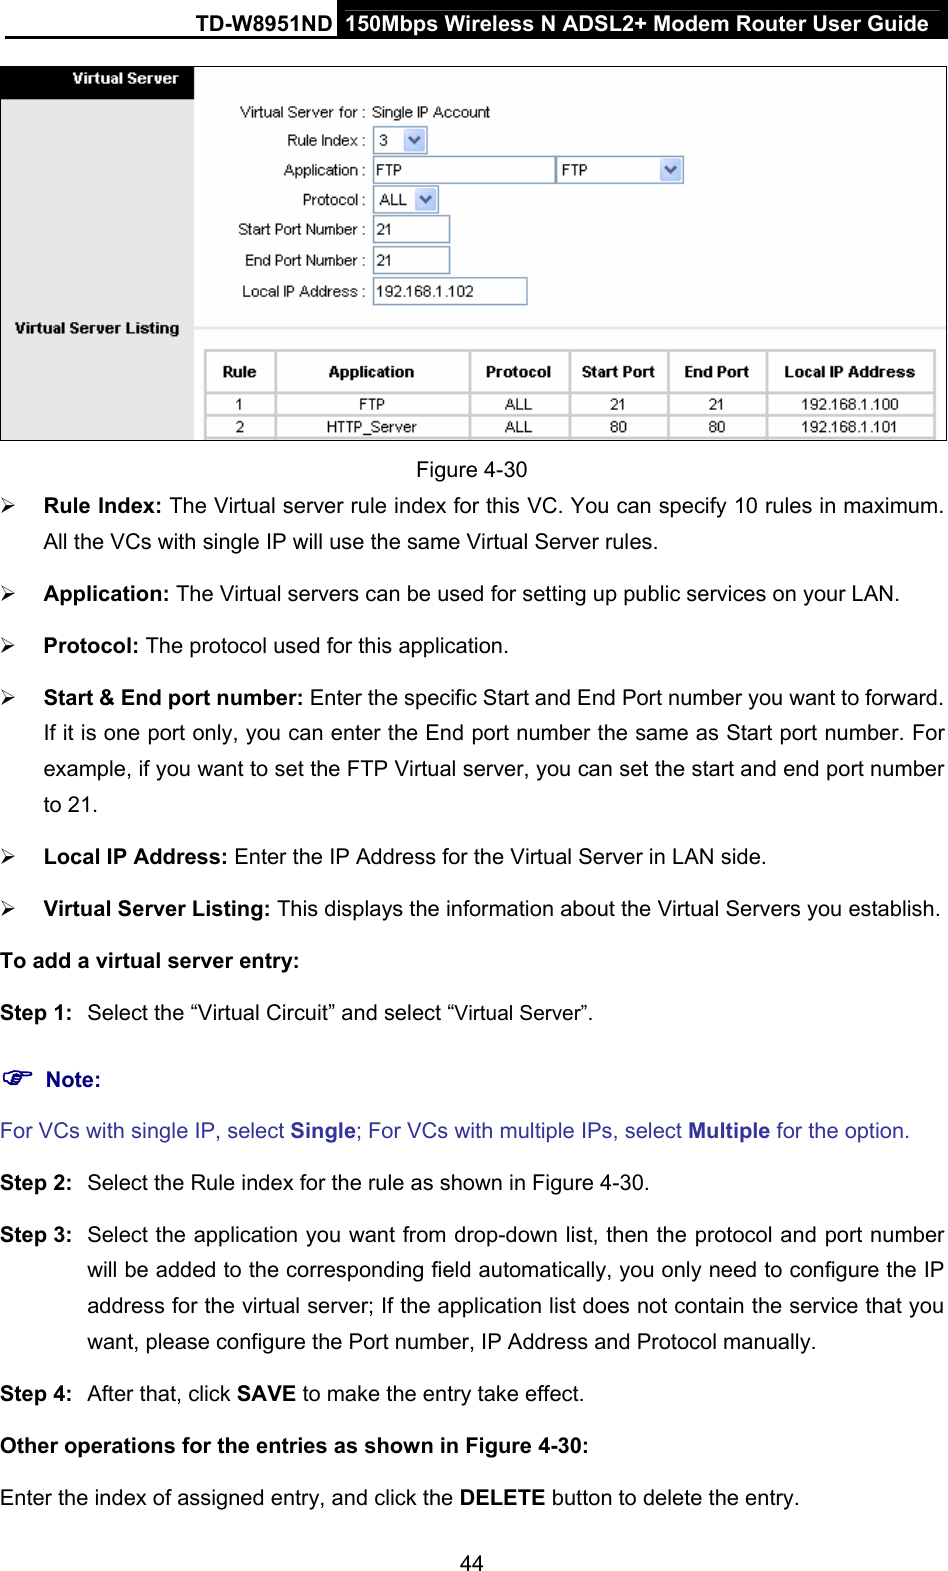 TD-W8951ND  150Mbps Wireless N ADSL2+ Modem Router User Guide  Figure 4-30 ¾ Rule Index: The Virtual server rule index for this VC. You can specify 10 rules in maximum. All the VCs with single IP will use the same Virtual Server rules. ¾ Application: The Virtual servers can be used for setting up public services on your LAN. ¾ Protocol: The protocol used for this application. ¾ Start &amp; End port number: Enter the specific Start and End Port number you want to forward. If it is one port only, you can enter the End port number the same as Start port number. For example, if you want to set the FTP Virtual server, you can set the start and end port number to 21. ¾ Local IP Address: Enter the IP Address for the Virtual Server in LAN side. ¾ Virtual Server Listing: This displays the information about the Virtual Servers you establish. To add a virtual server entry:   Step 1:  Select the “Virtual Circuit” and select “Virtual Server”. ) Note: For VCs with single IP, select Single; For VCs with multiple IPs, select Multiple for the option. Step 2:  Select the Rule index for the rule as shown in Figure 4-30. Step 3:  Select the application you want from drop-down list, then the protocol and port number will be added to the corresponding field automatically, you only need to configure the IP address for the virtual server; If the application list does not contain the service that you want, please configure the Port number, IP Address and Protocol manually. Step 4:  After that, click SAVE to make the entry take effect. Other operations for the entries as shown in Figure 4-30: Enter the index of assigned entry, and click the DELETE button to delete the entry. 44 